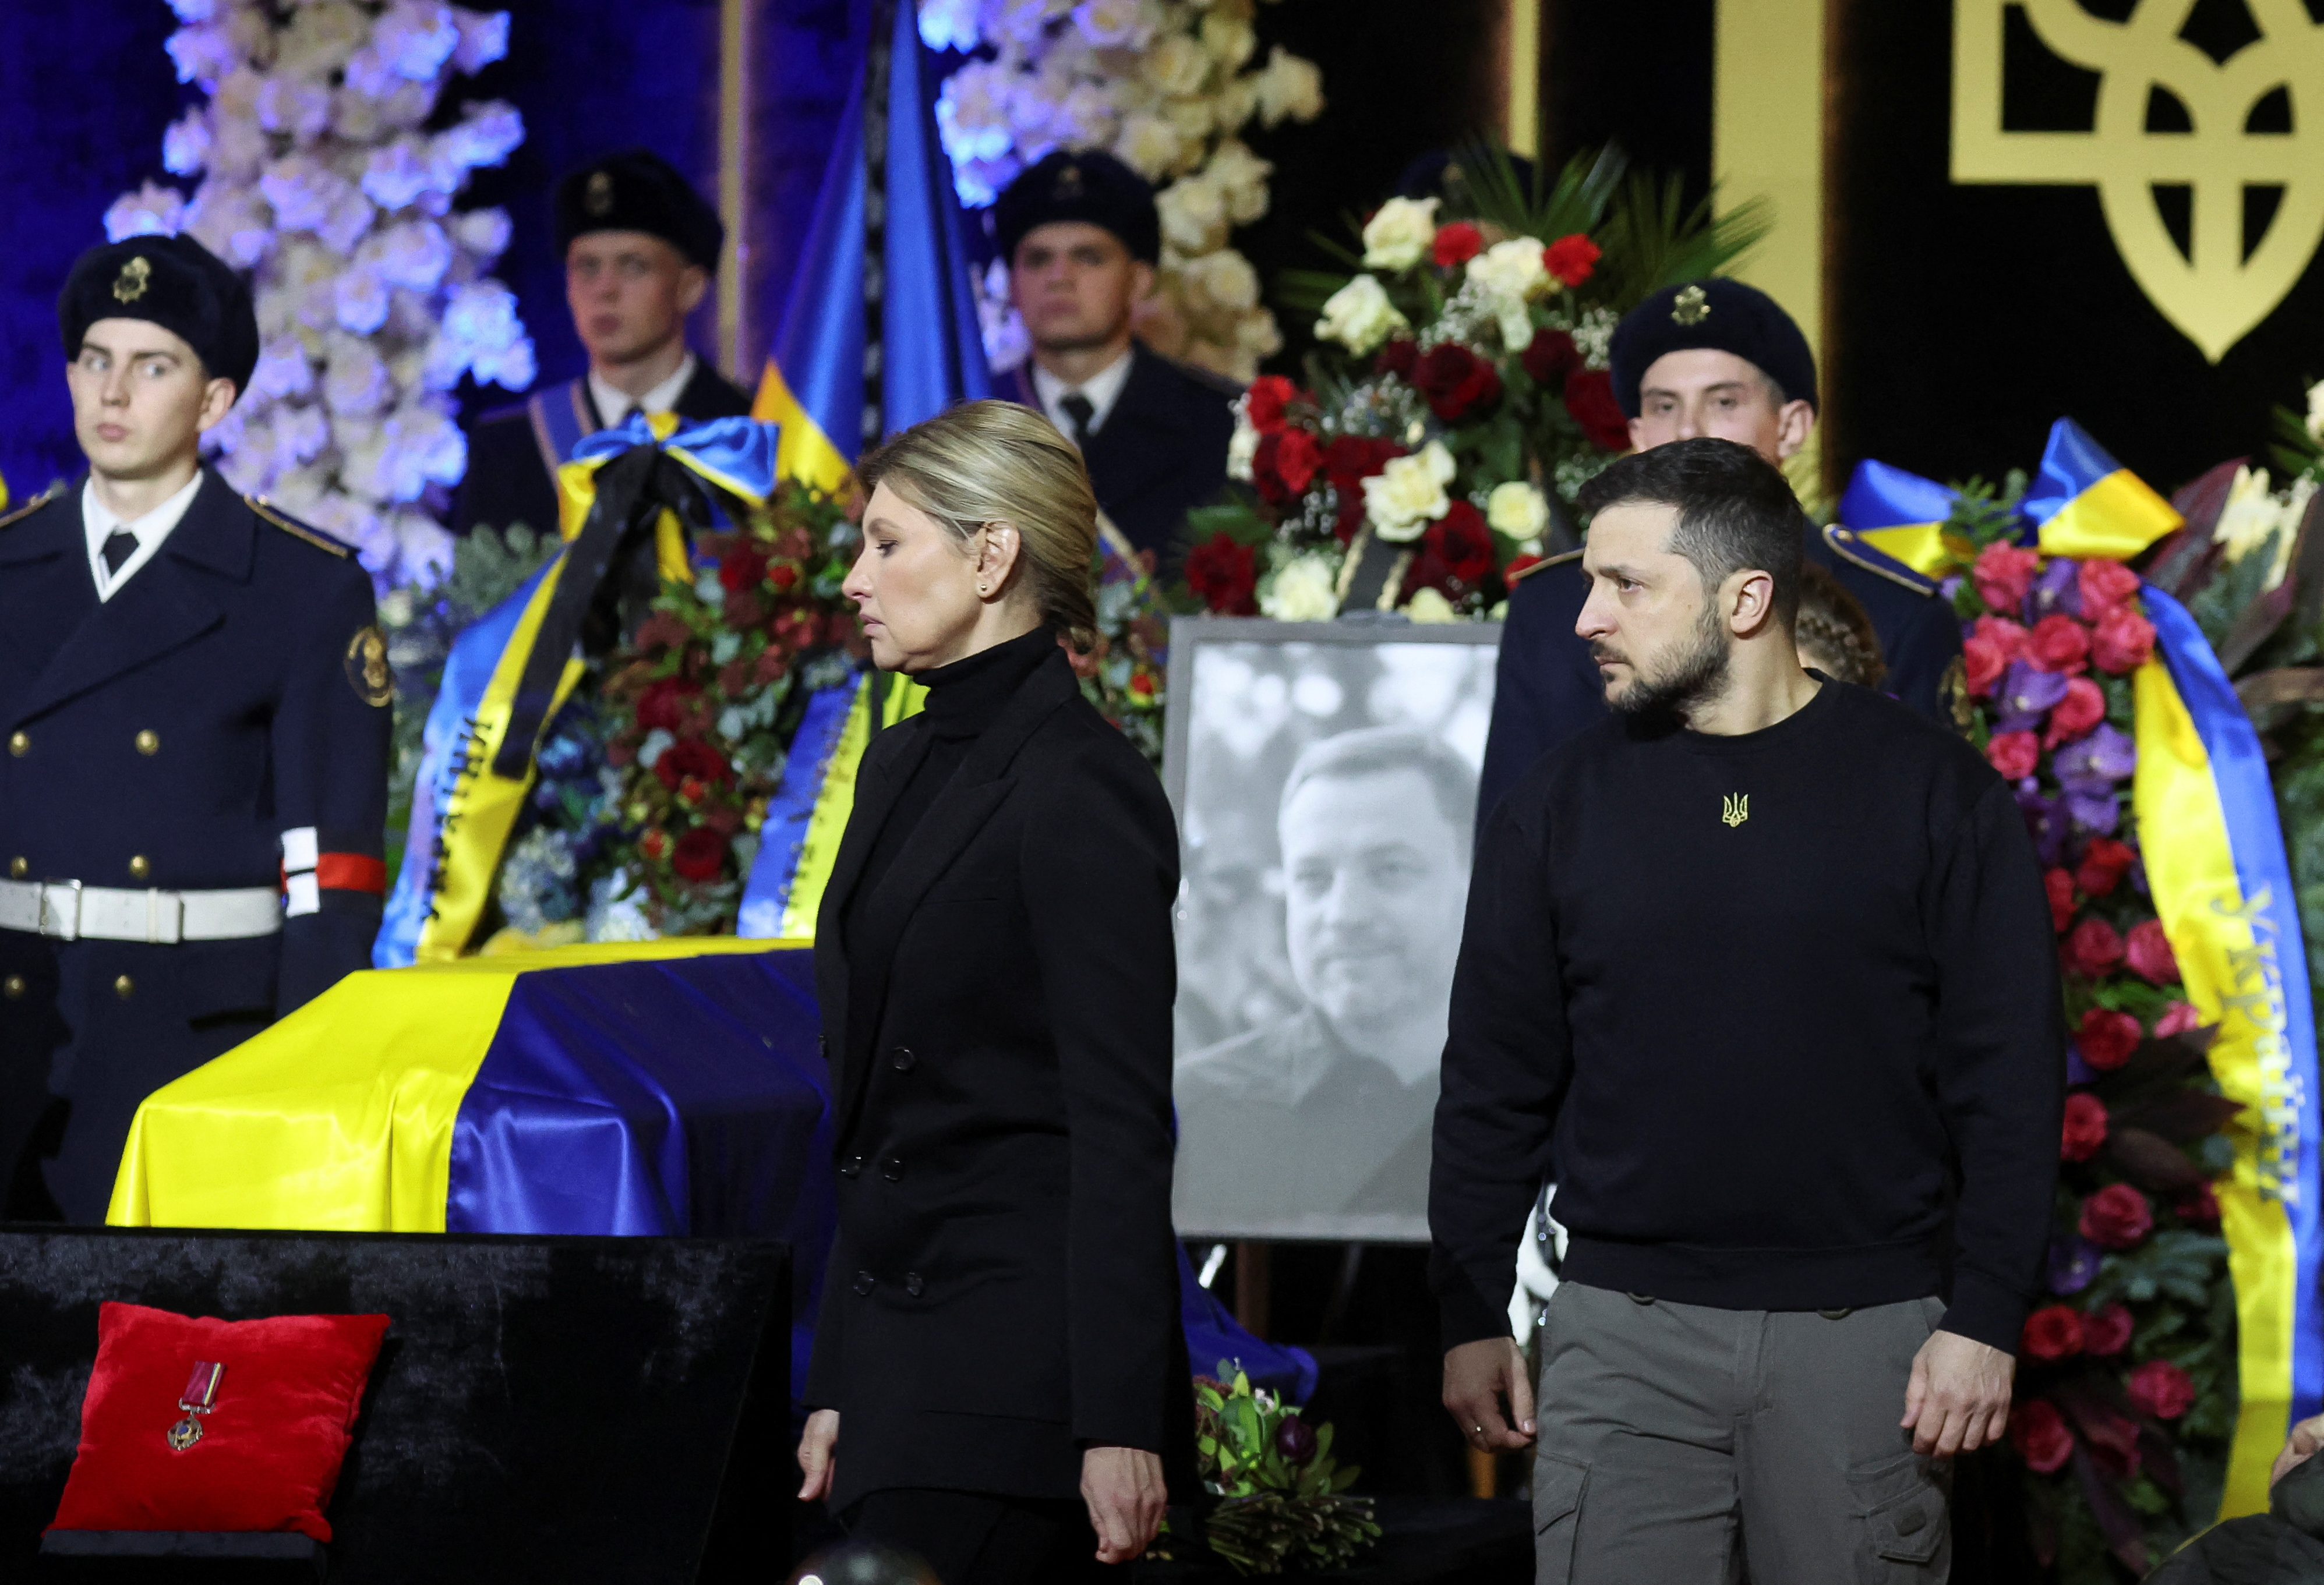 Ceremony in memory of those who died in the helicopter crash near kyiv, in kyiv, Ukraine, January 21, 2023. REUTERS/Nacho Doce